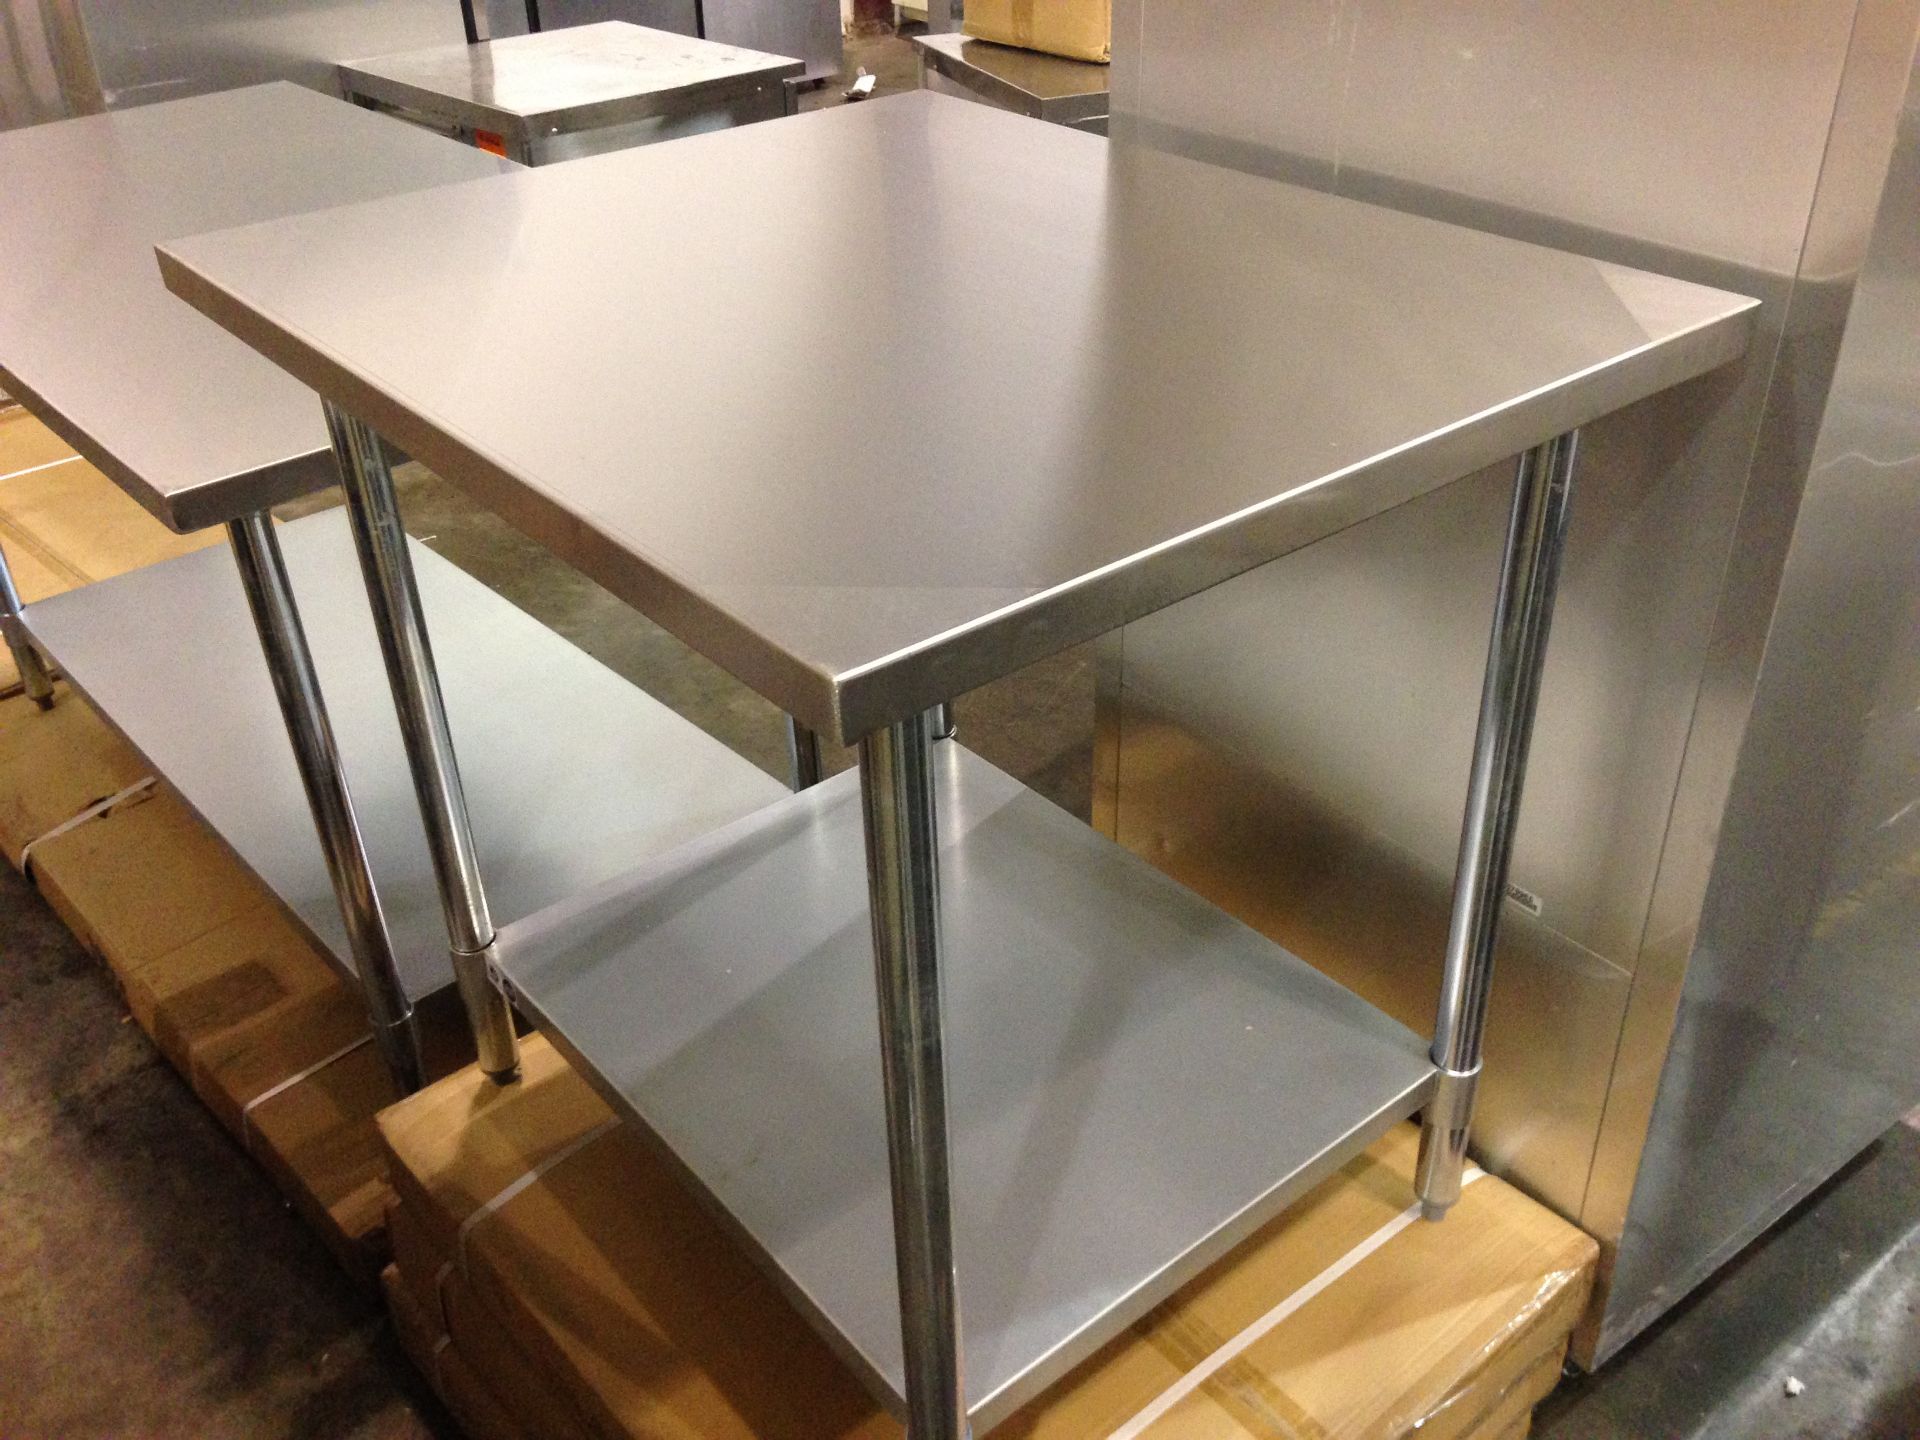 Stainless Work Table 30"x36"